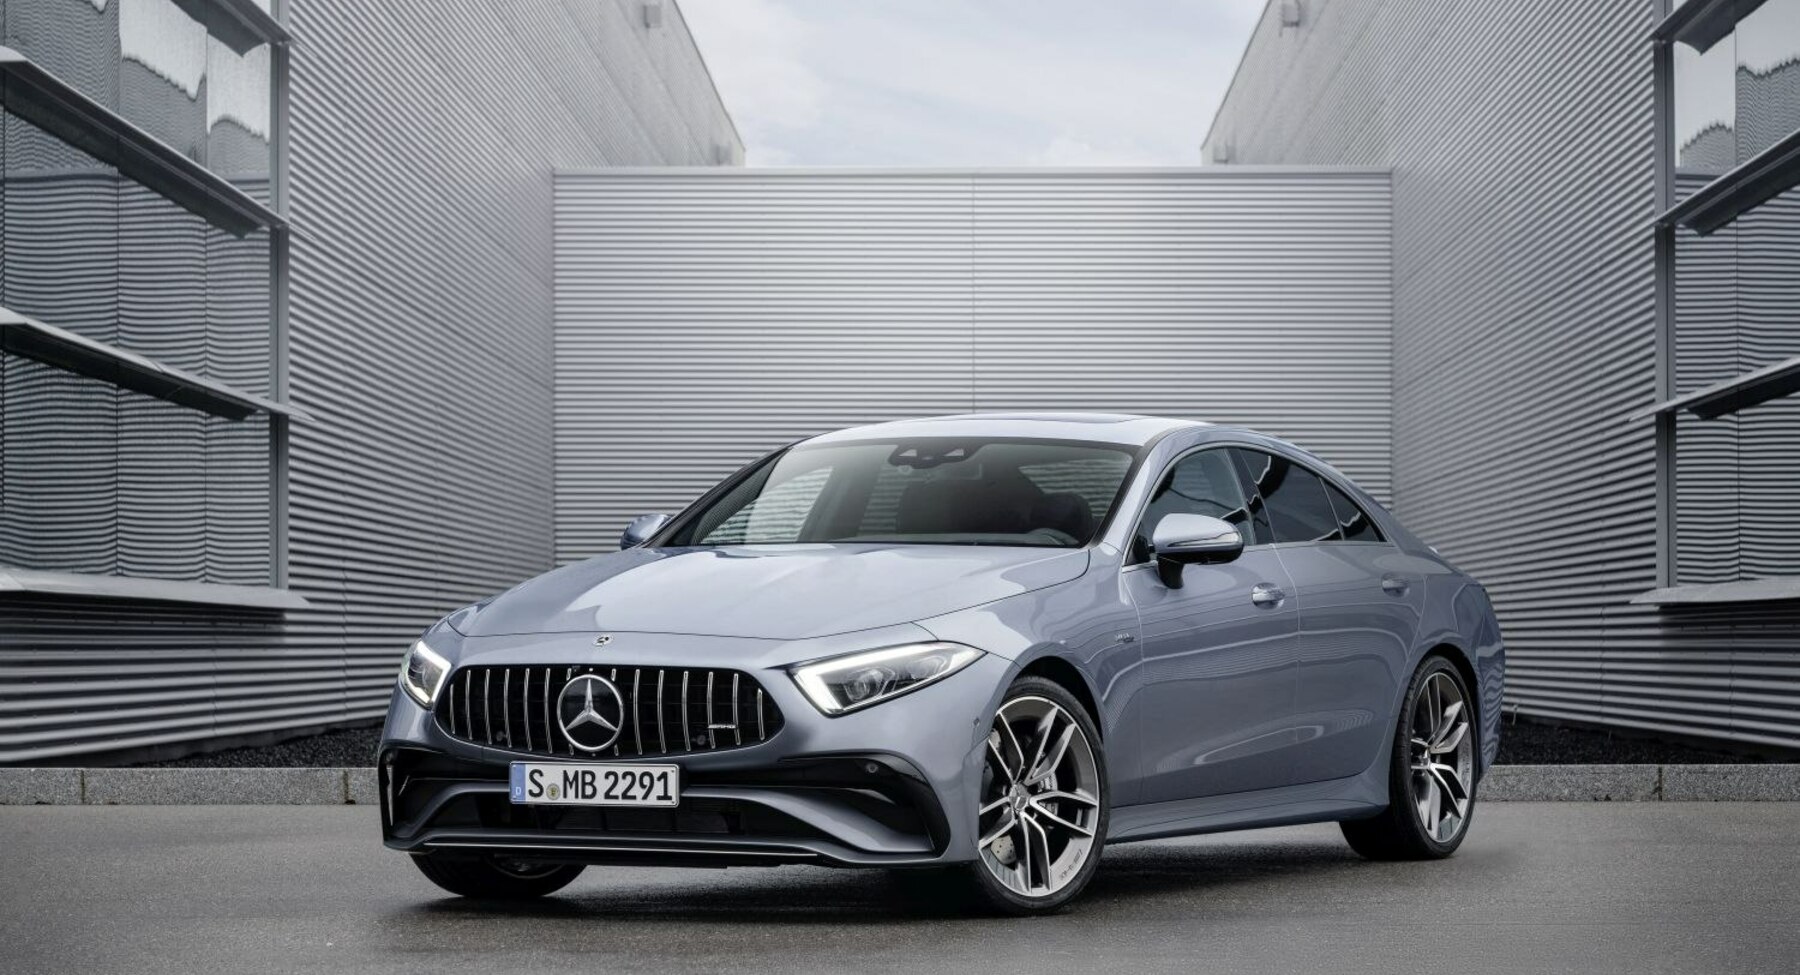 Mercedes-Benz CLS coupe (C257, facelift 2021) CLS 400d (330 Hp) 4MATIC 9G-TRONIC 2021, 2022